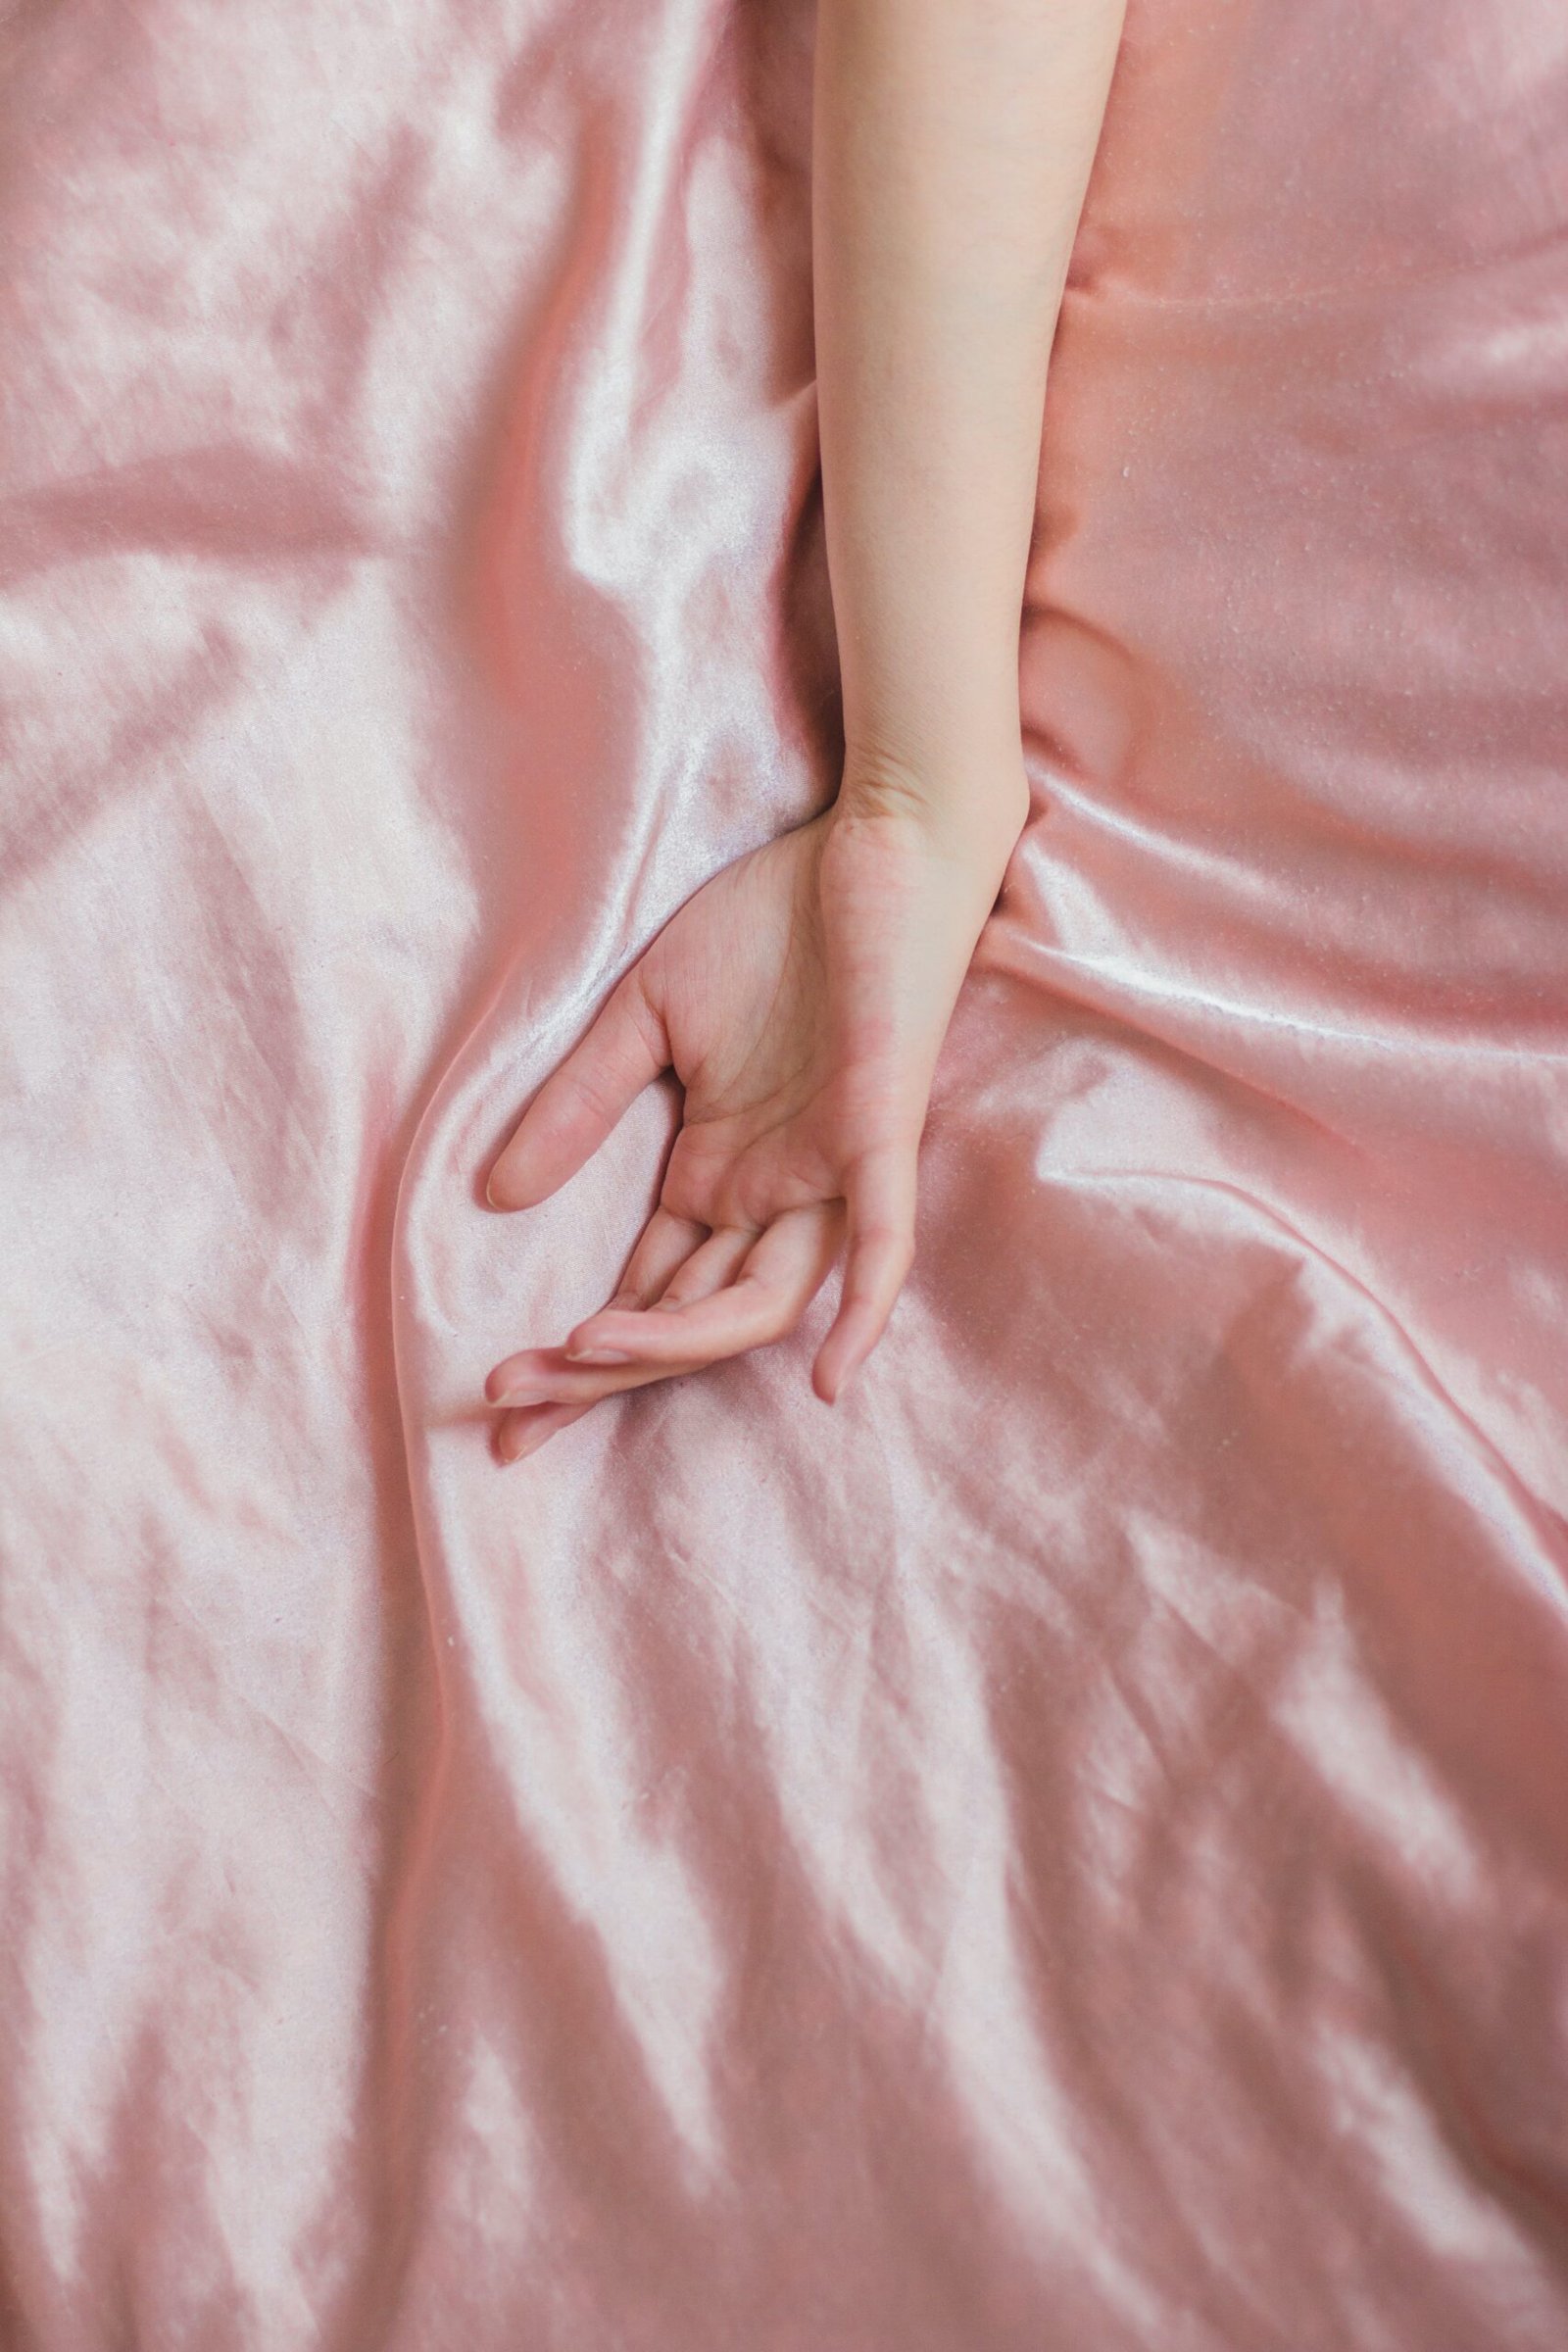 A womans hand in bed illustrating progressive muscle relaxation.